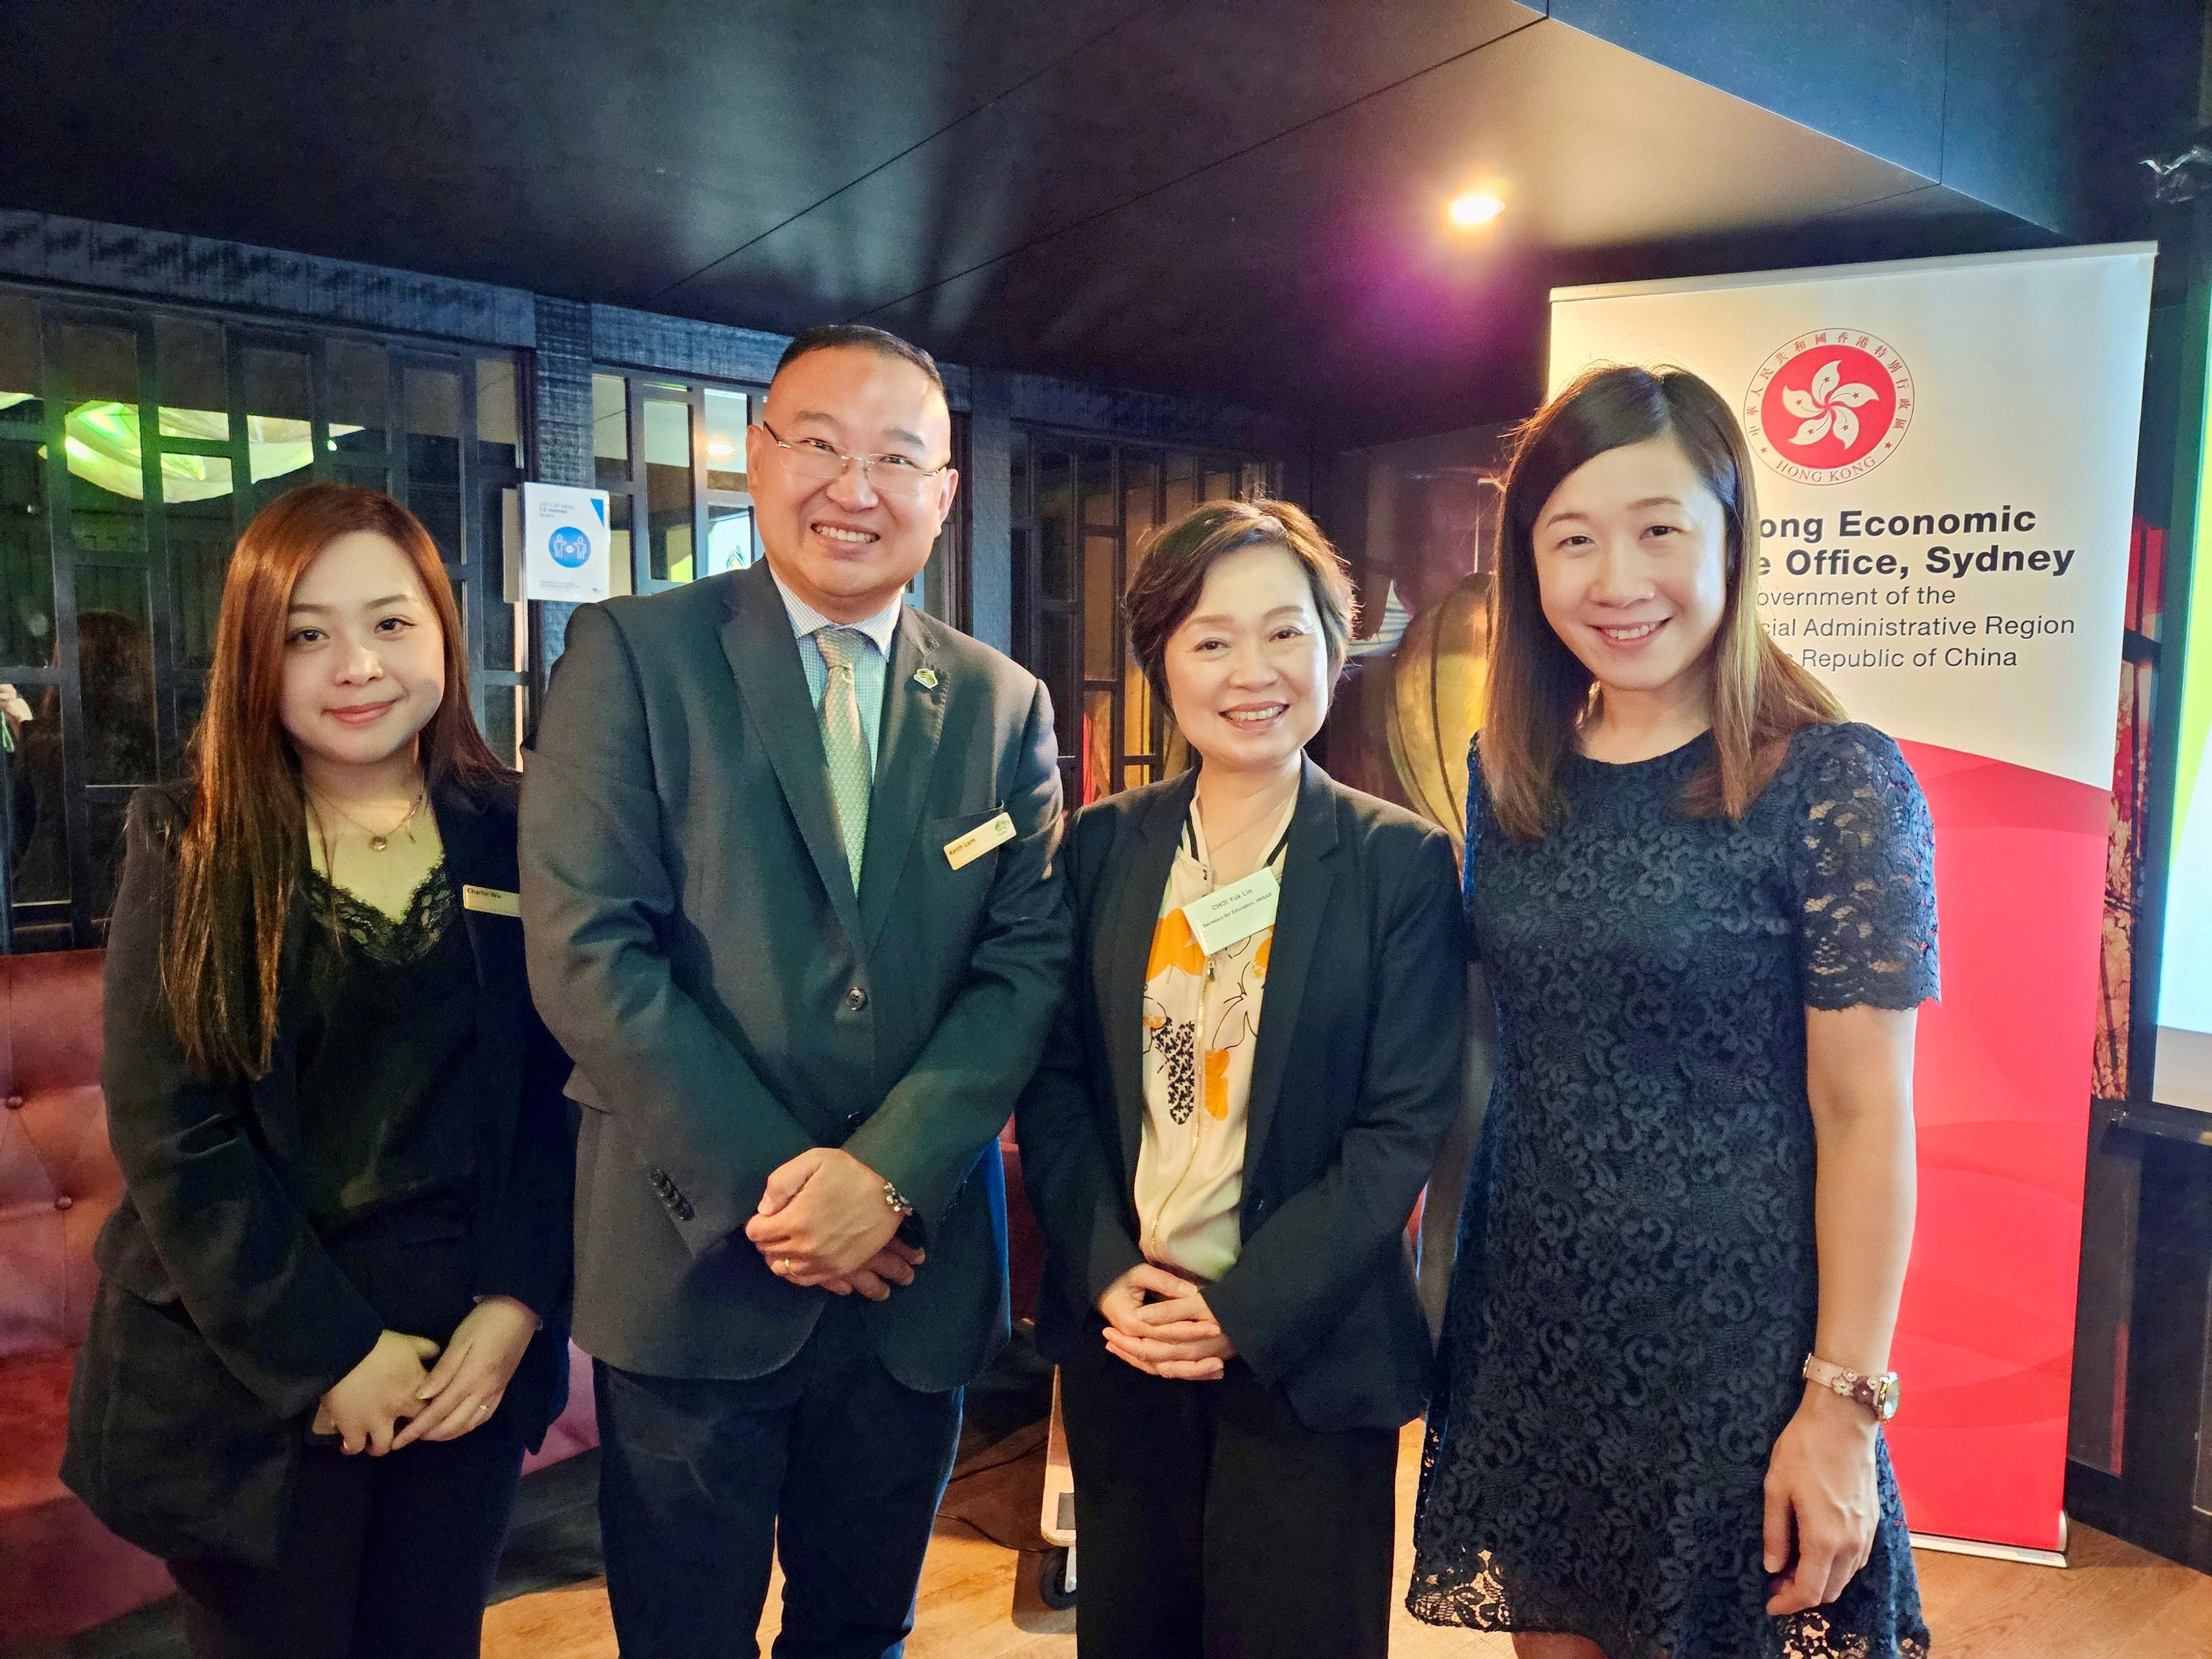 The Secretary for Education, Dr Choi Yuk-lin, meets representatives of the business community in Melbourne, Australia to promote the edges of Hong Kong as an international hub for post-secondary education in Melbourne today (March 9, Melbourne time). Photo shows Dr Choi (second right); the Director of the Hong Kong Economic and Trade Office, Sydney, Miss Trista Lim (first right); and the President of the Victoria Chapter of the Hong Kong Australia Business Association, Mr Keith Lam (second left), taking a group photo.